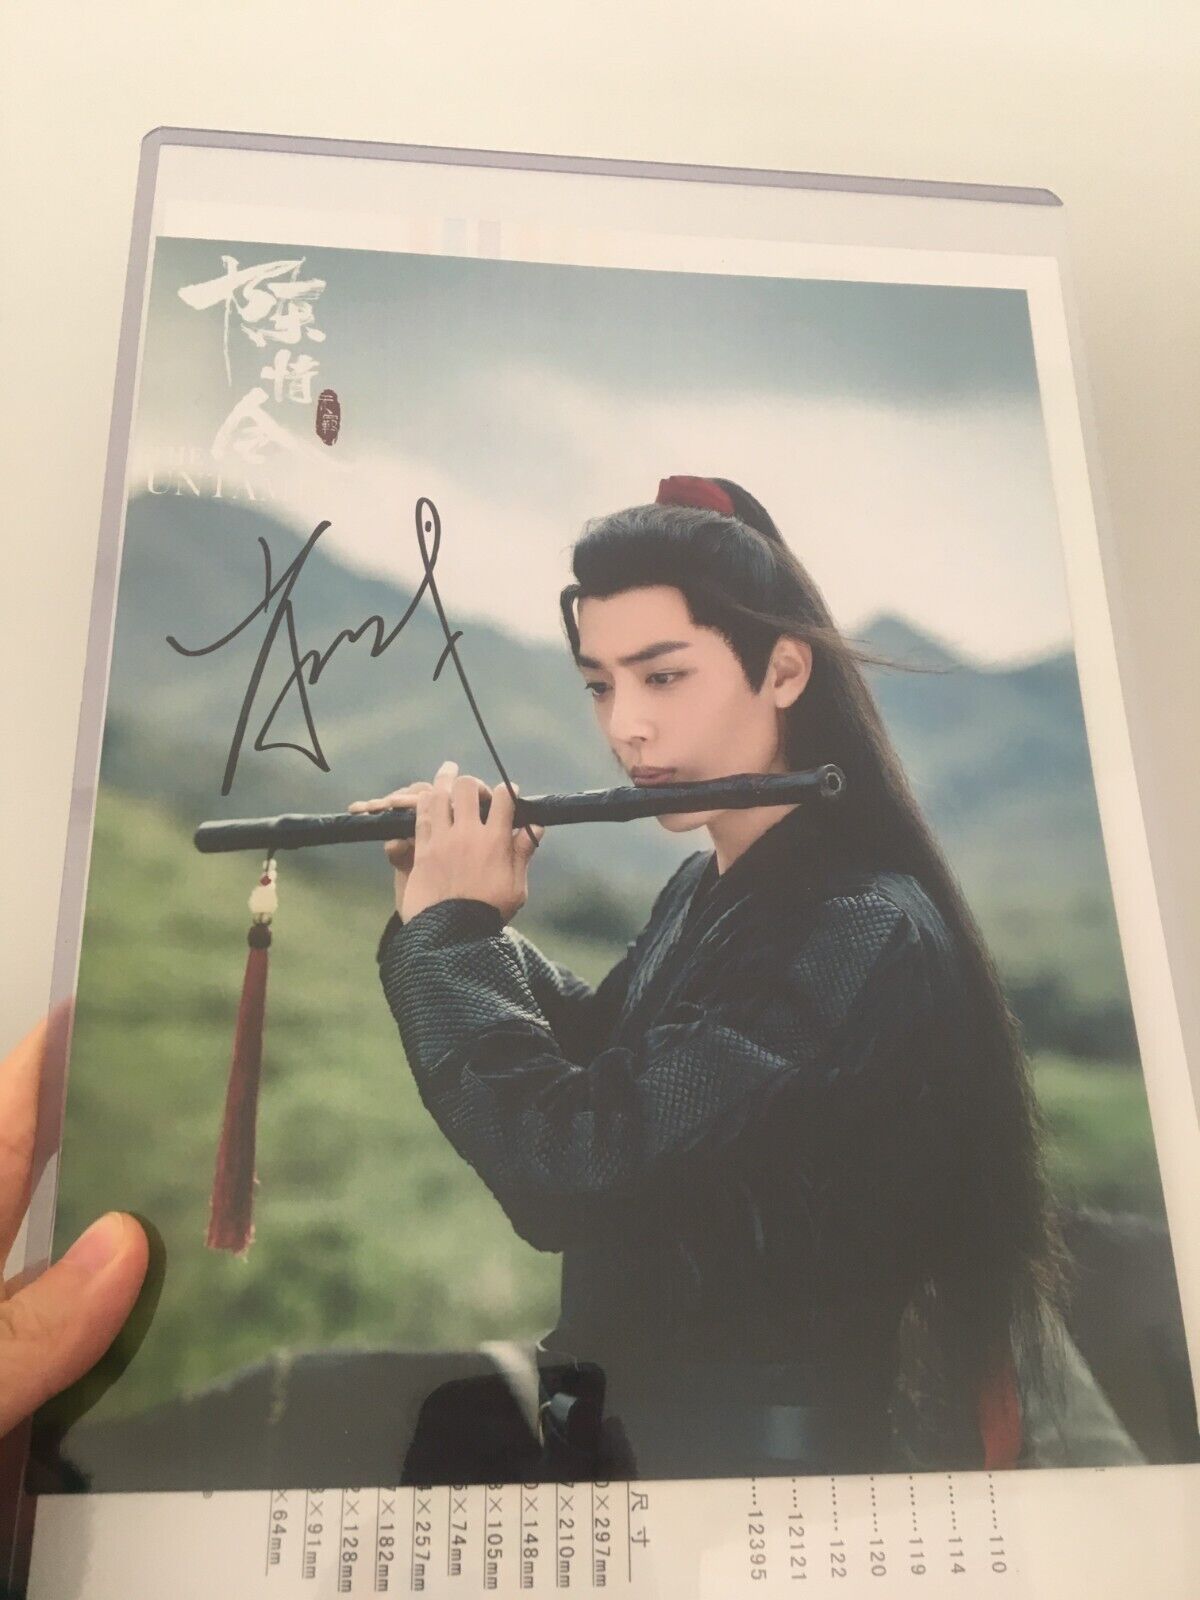 SALE Xiao Zhan CHEN QING LING Autographed Signed Photo Poster 8*10 2021